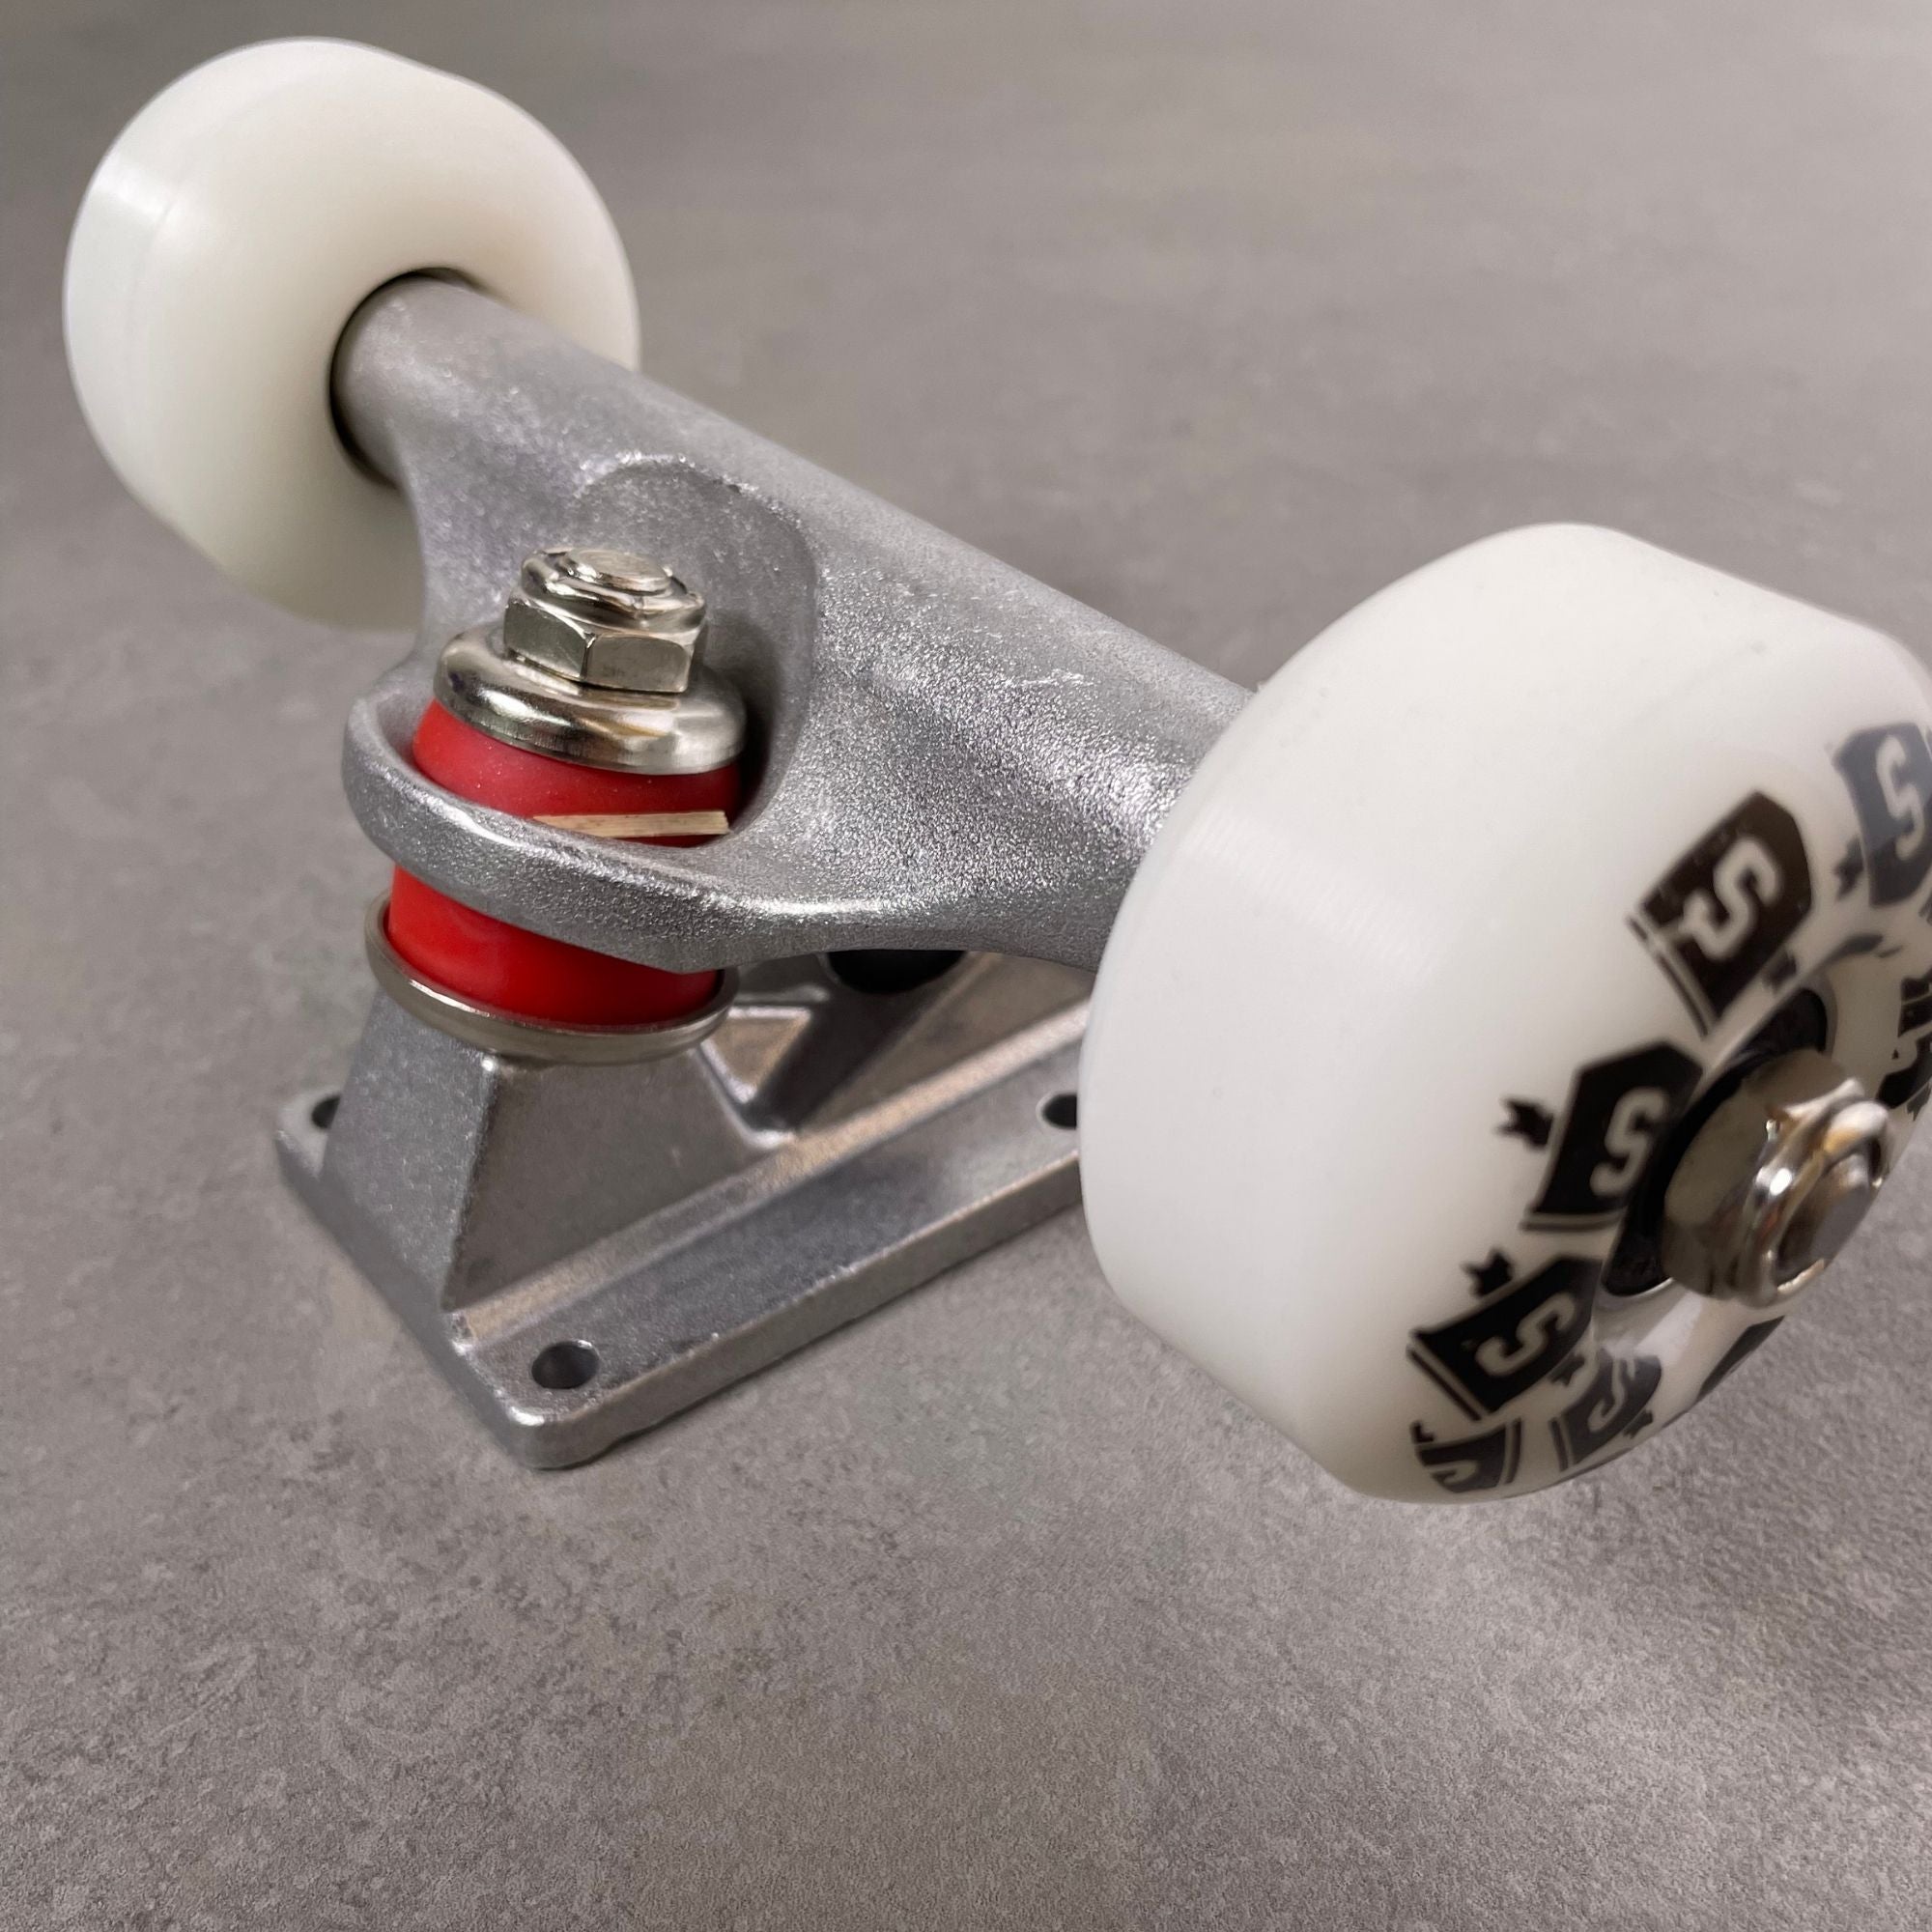 Stoked Complete Truck Assembly Set 7.75" Raw/White